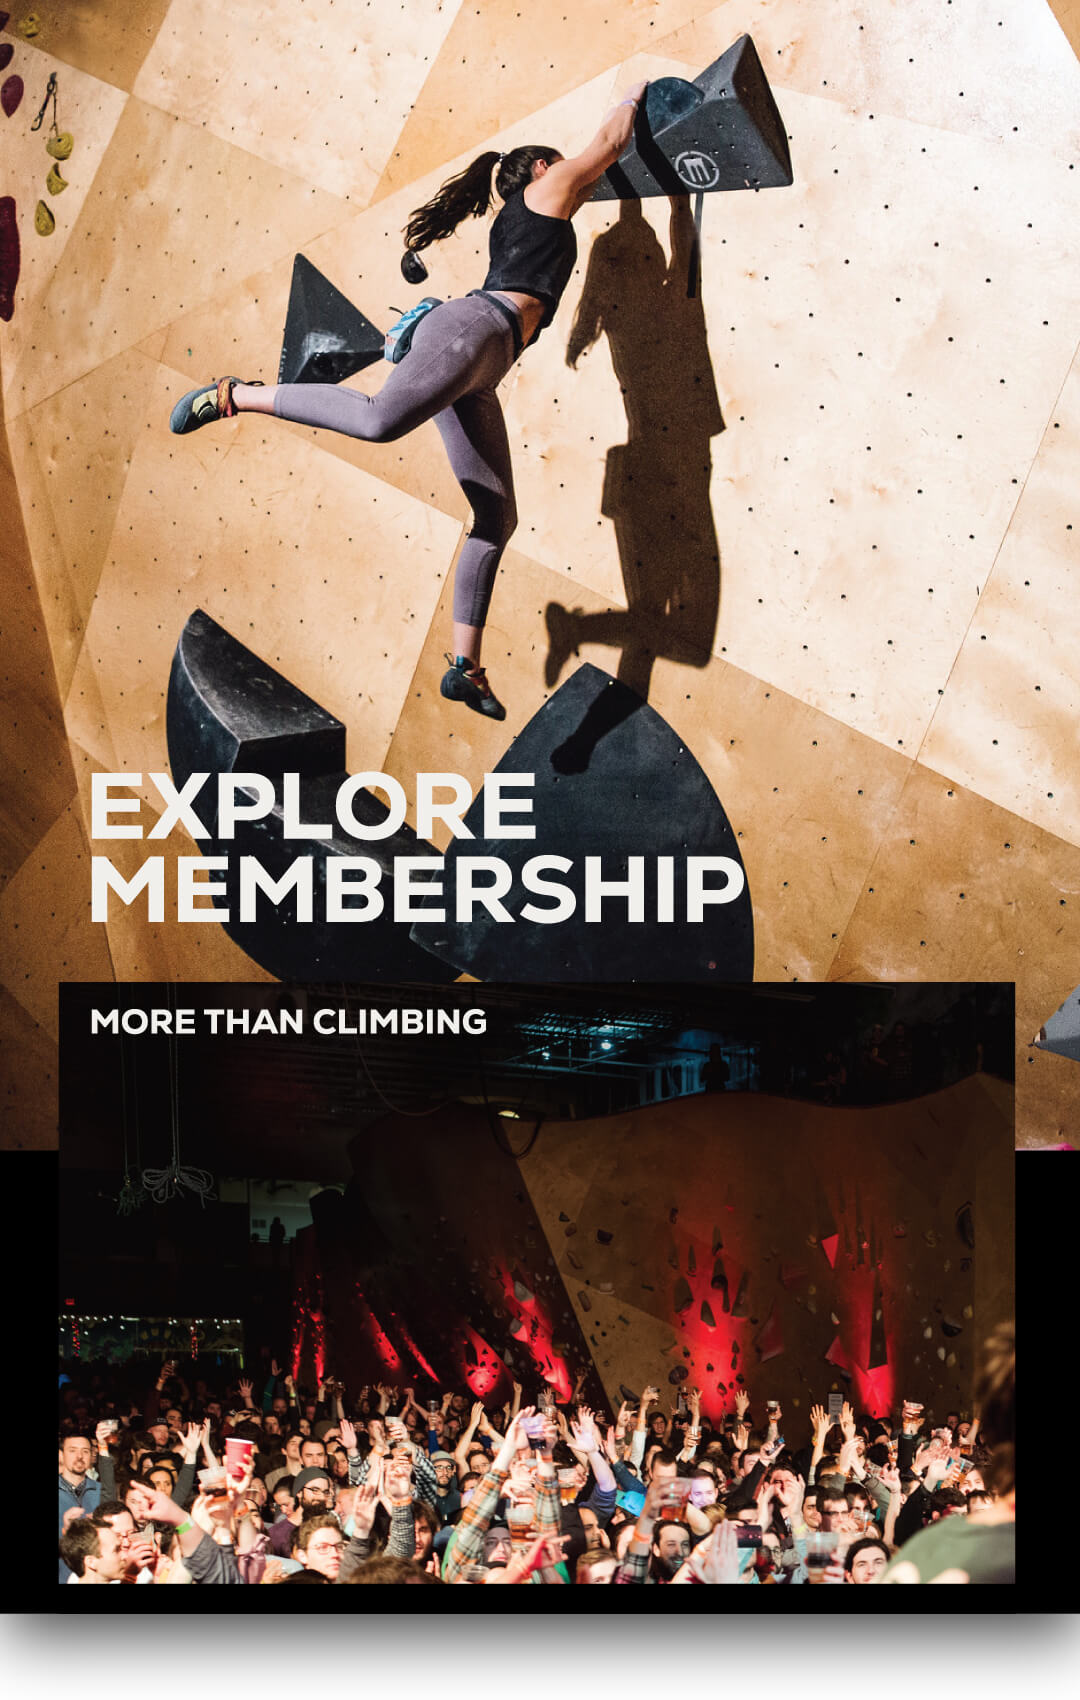 Explore membership - Woman leaping to next rock on indoor rock climbing wall & crowd of people at rock climbing event